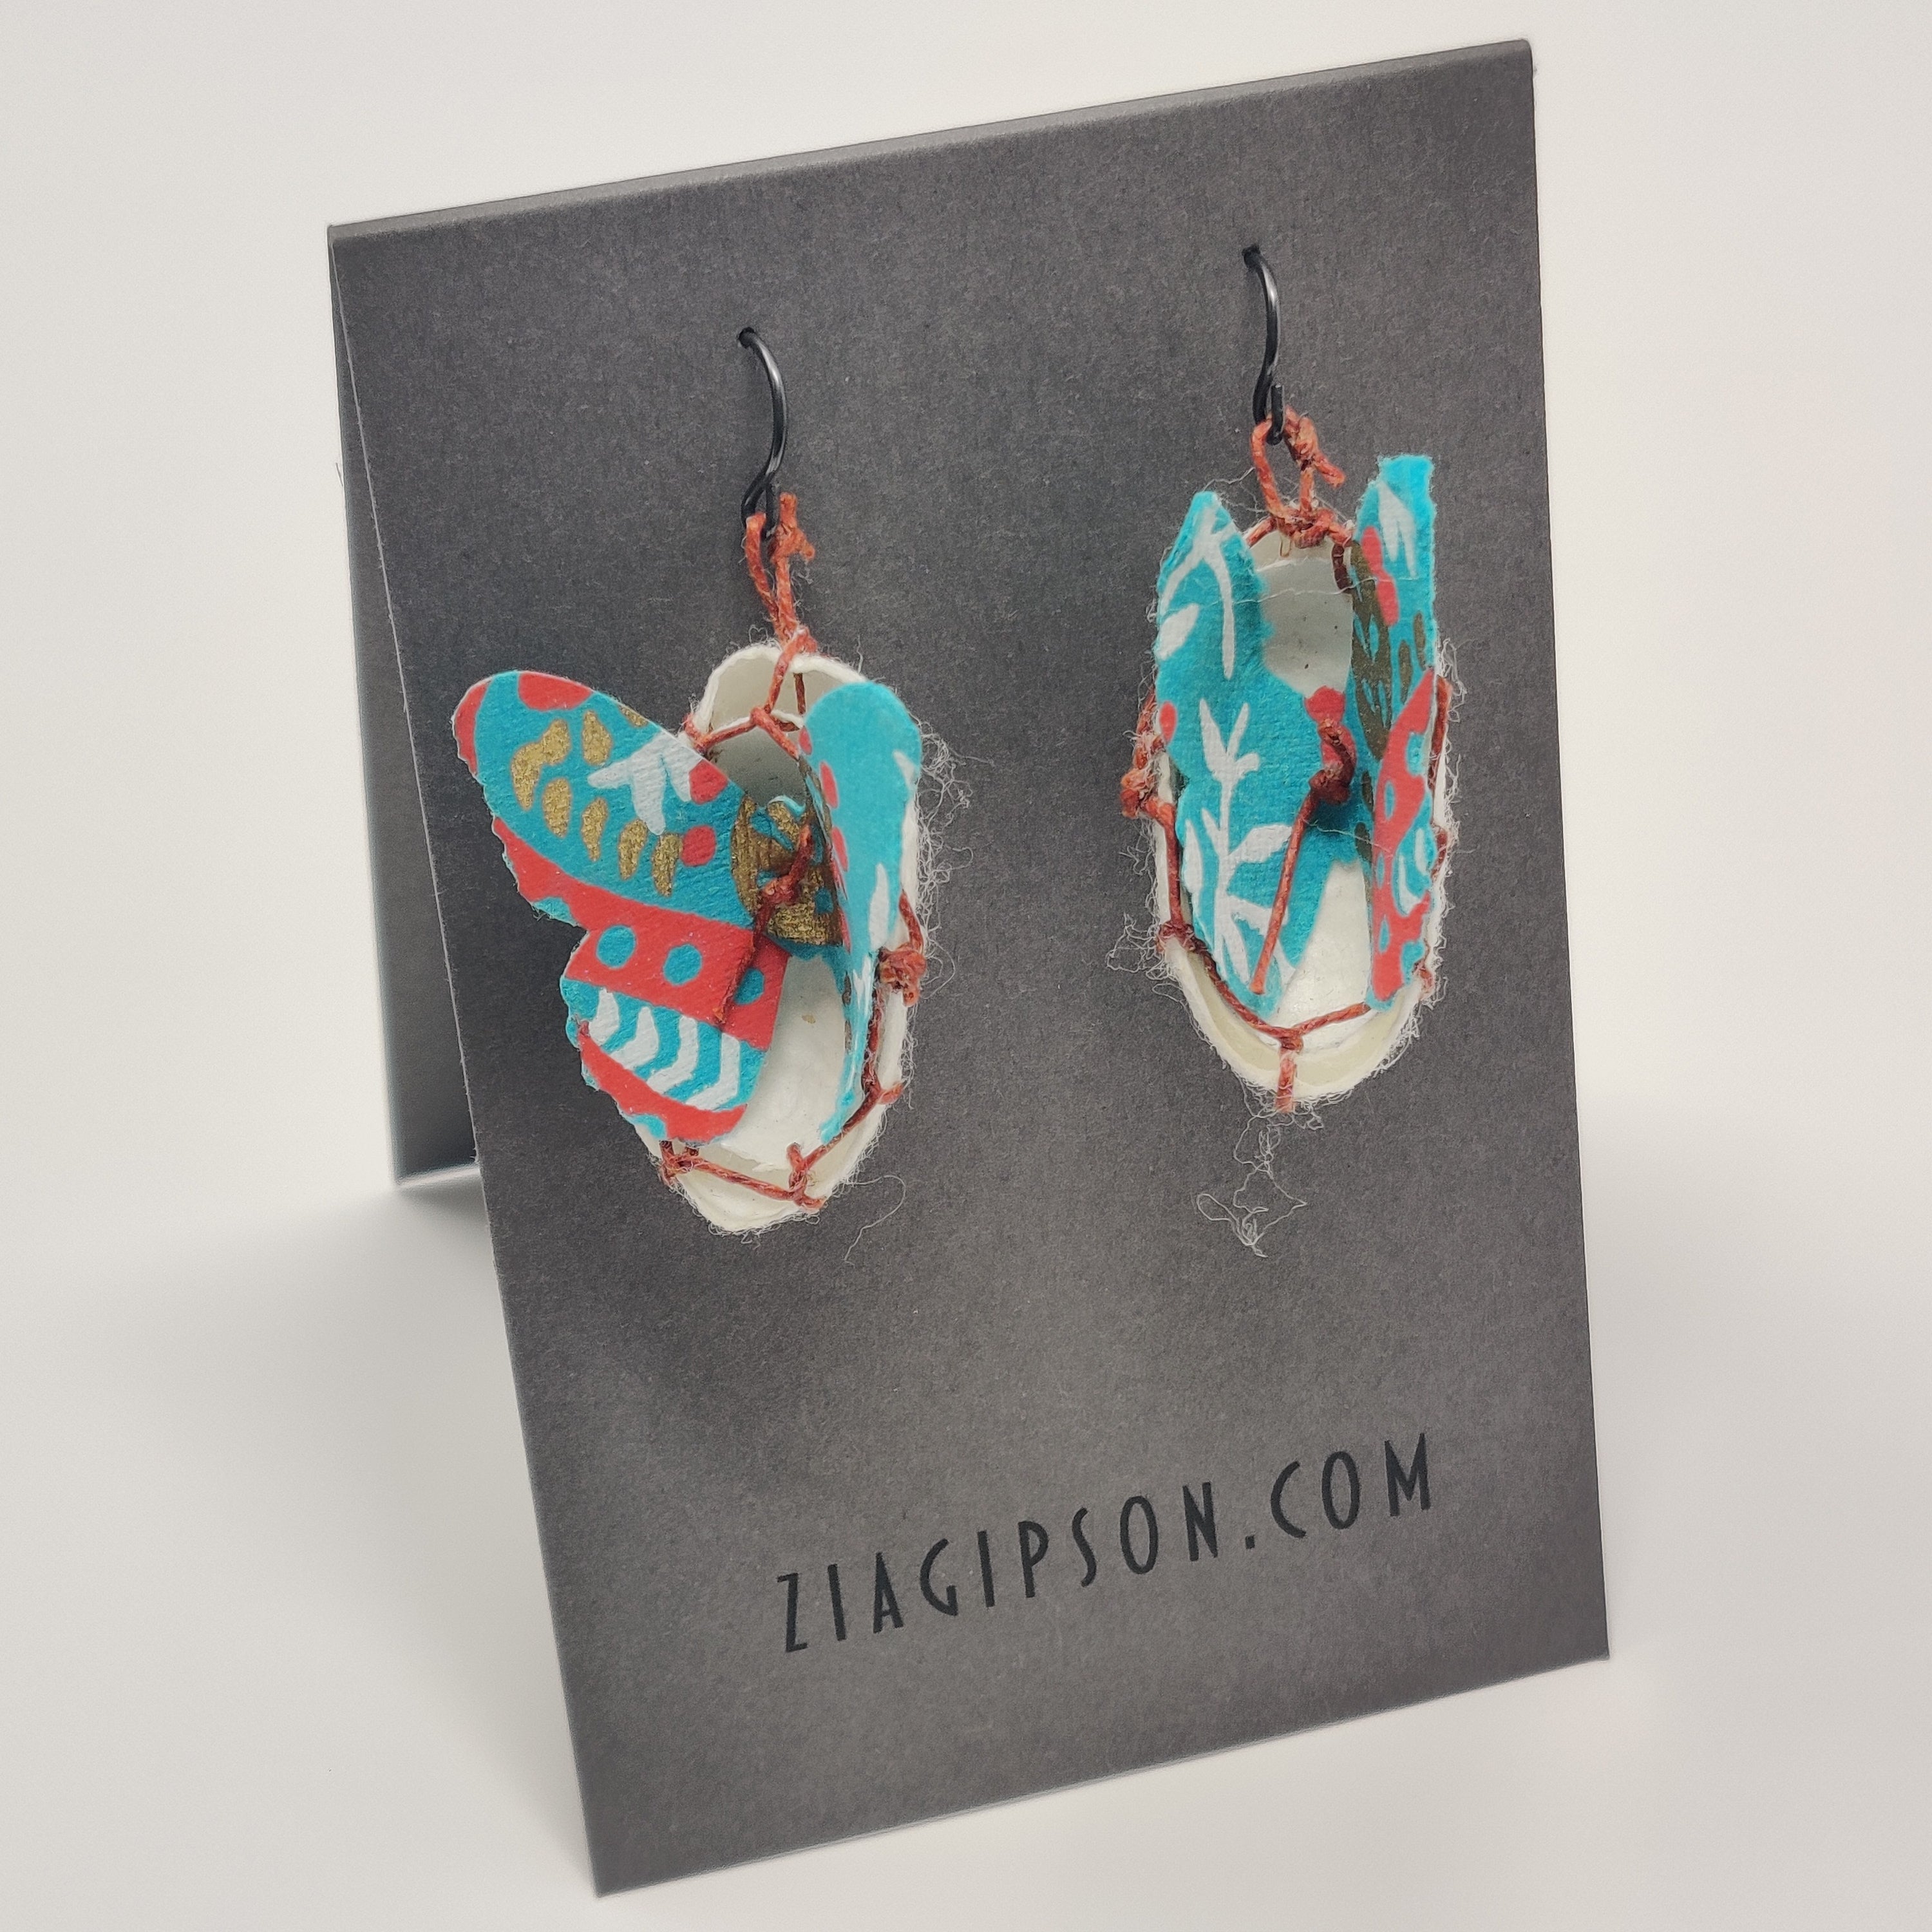 Teal and Coral Earrings by Zia Gipson